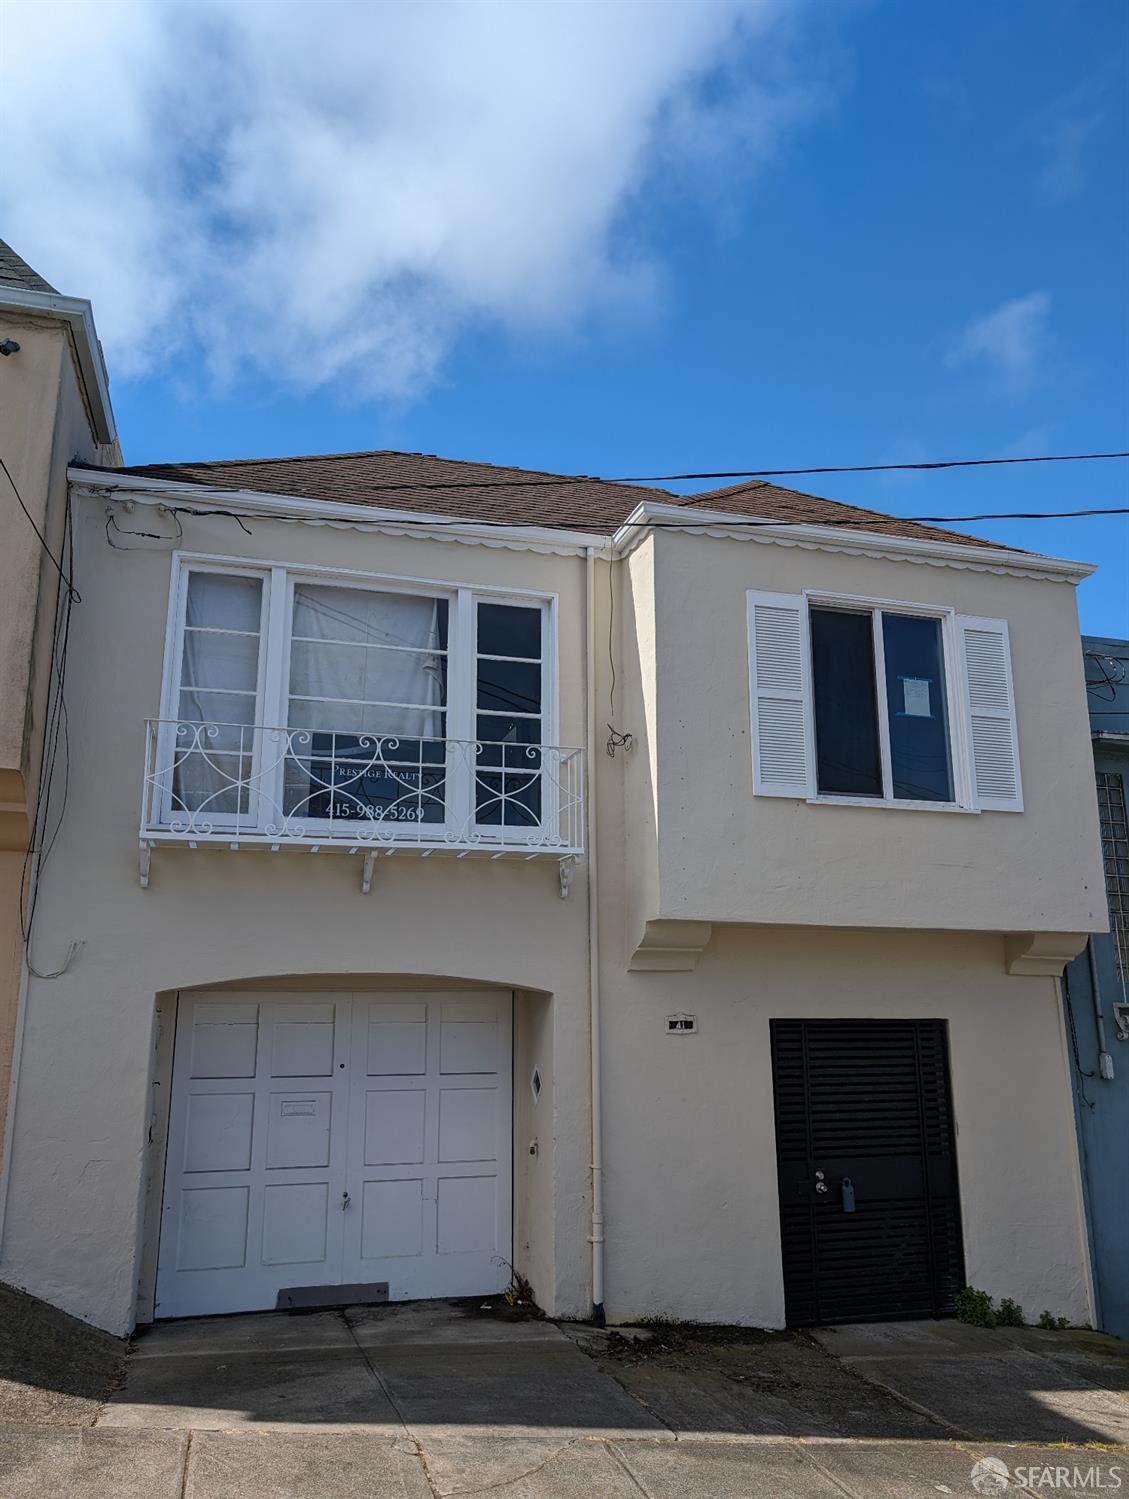 Photo of 41 Guadalupe Ave in Daly City, CA